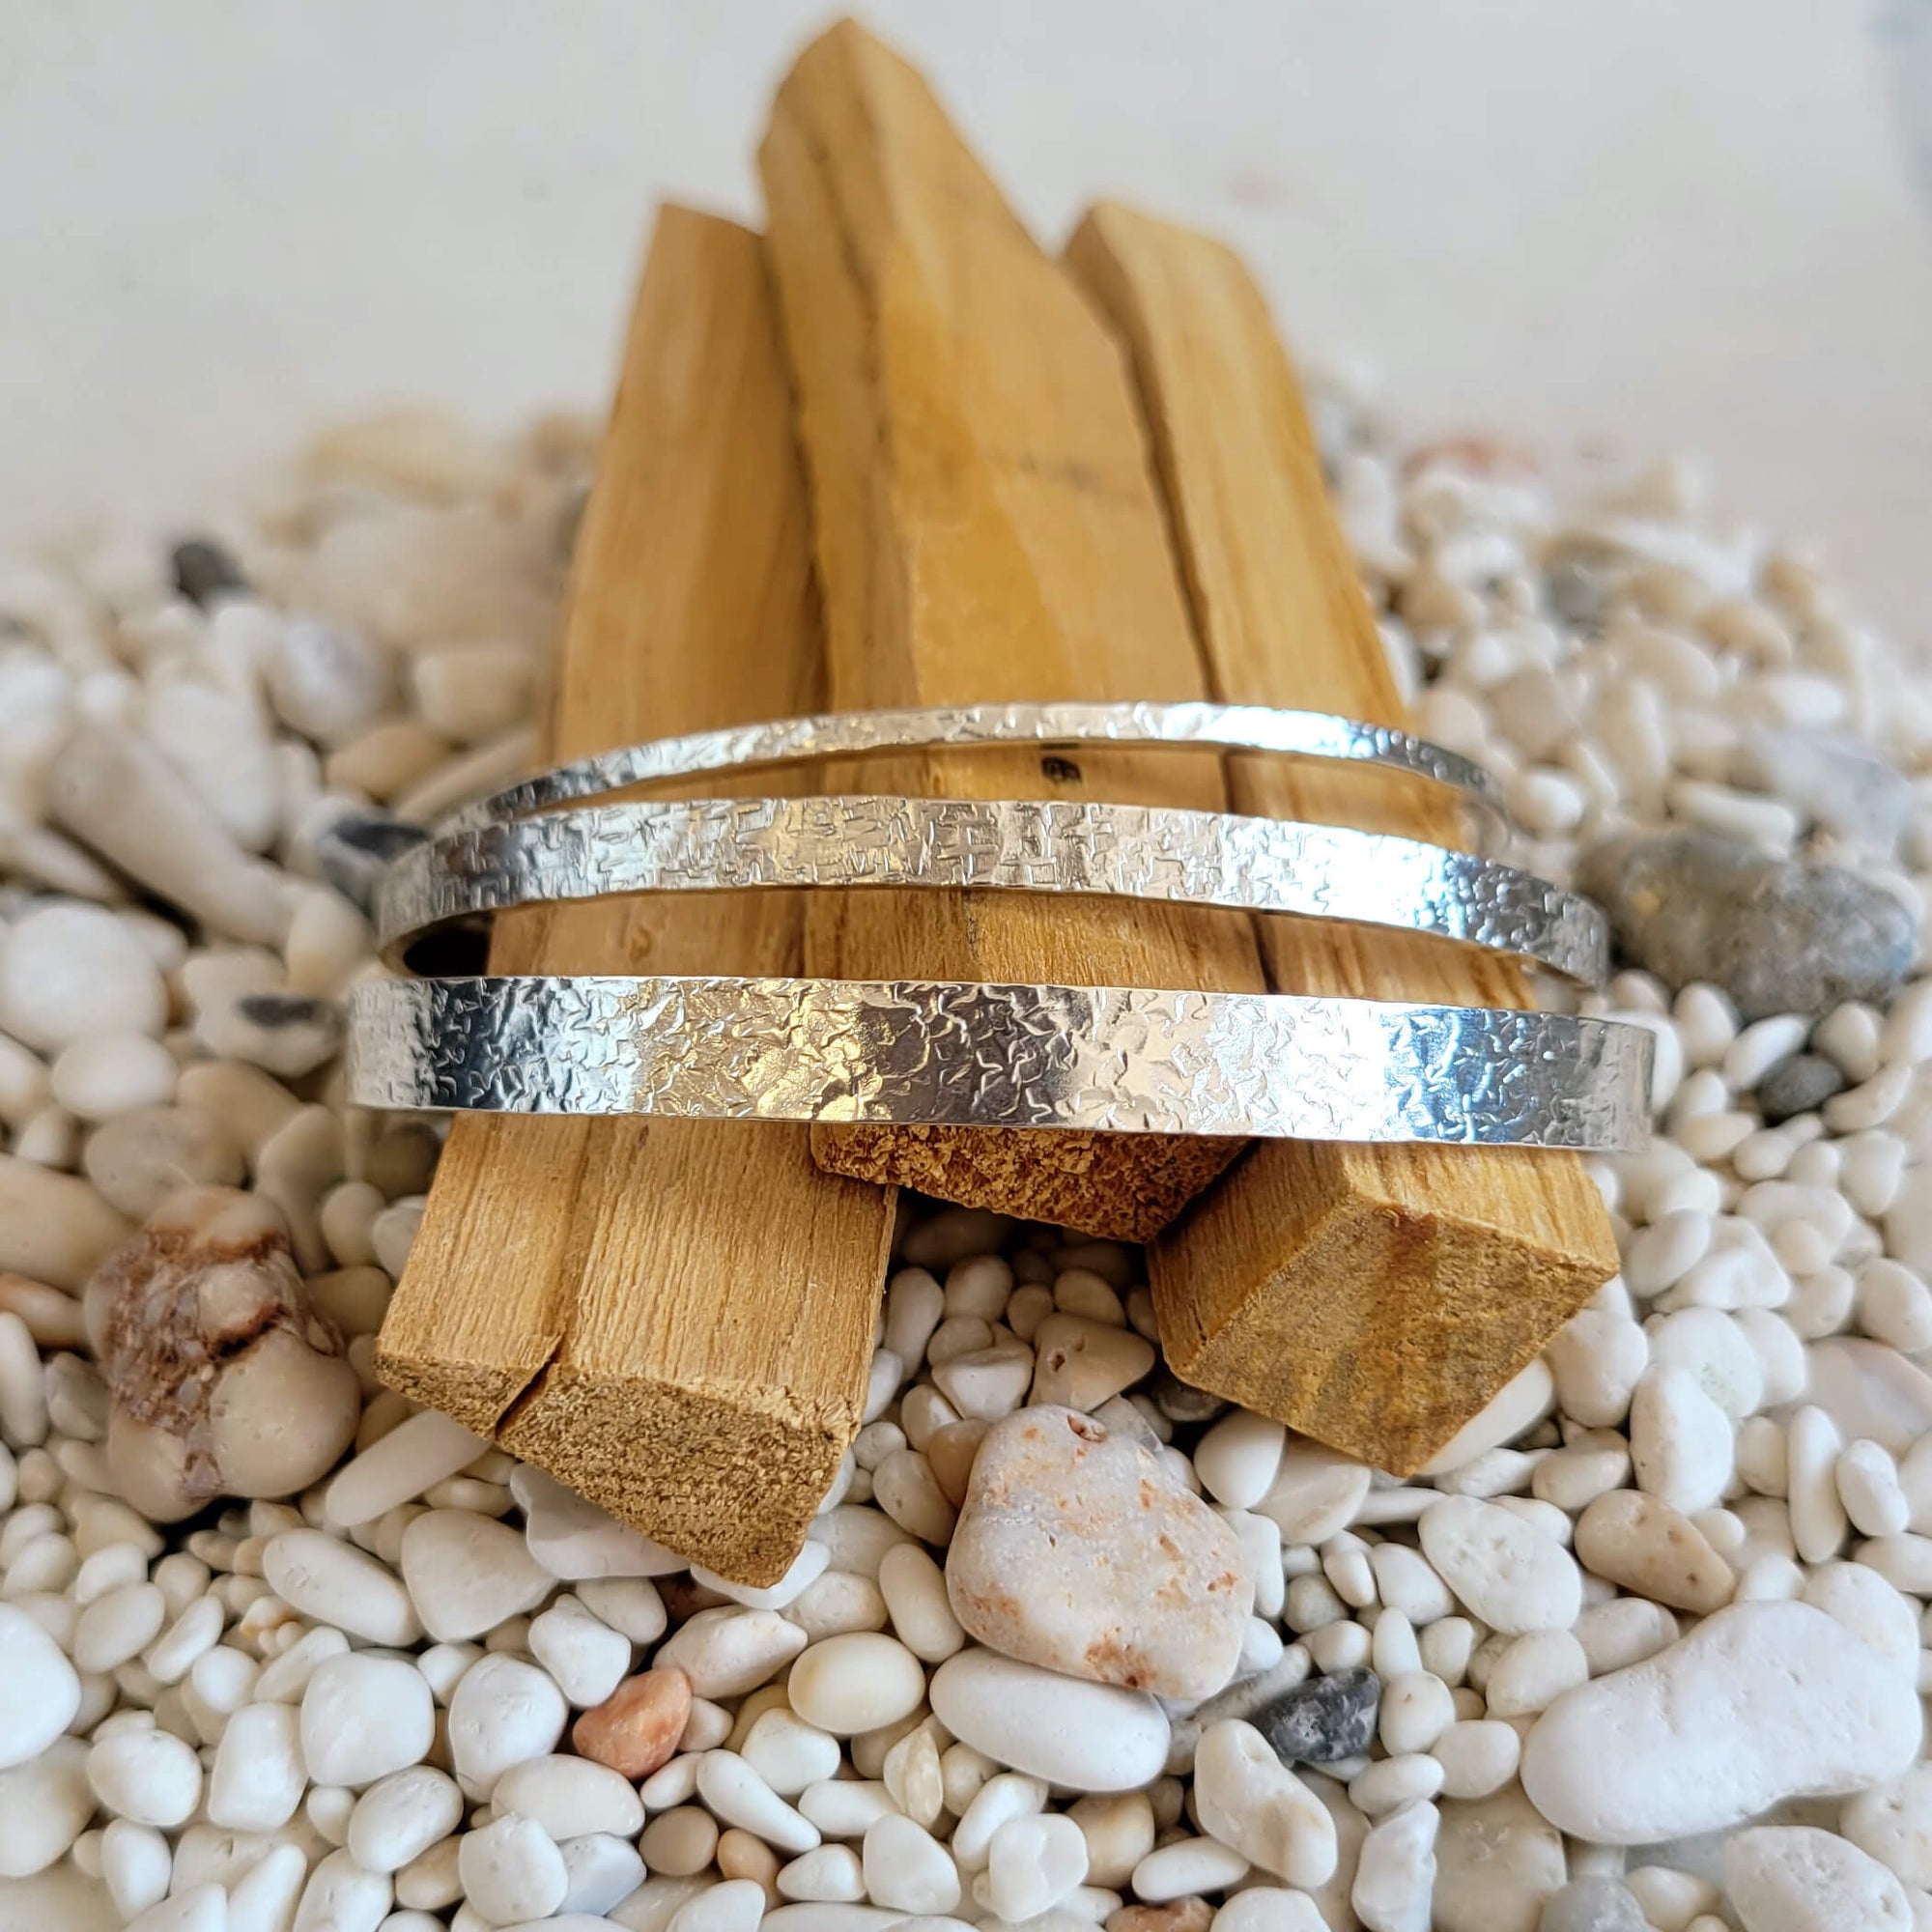 Silk hammered sterling silver bracelets from EC Design Jewelry in Minneapolis, MN.